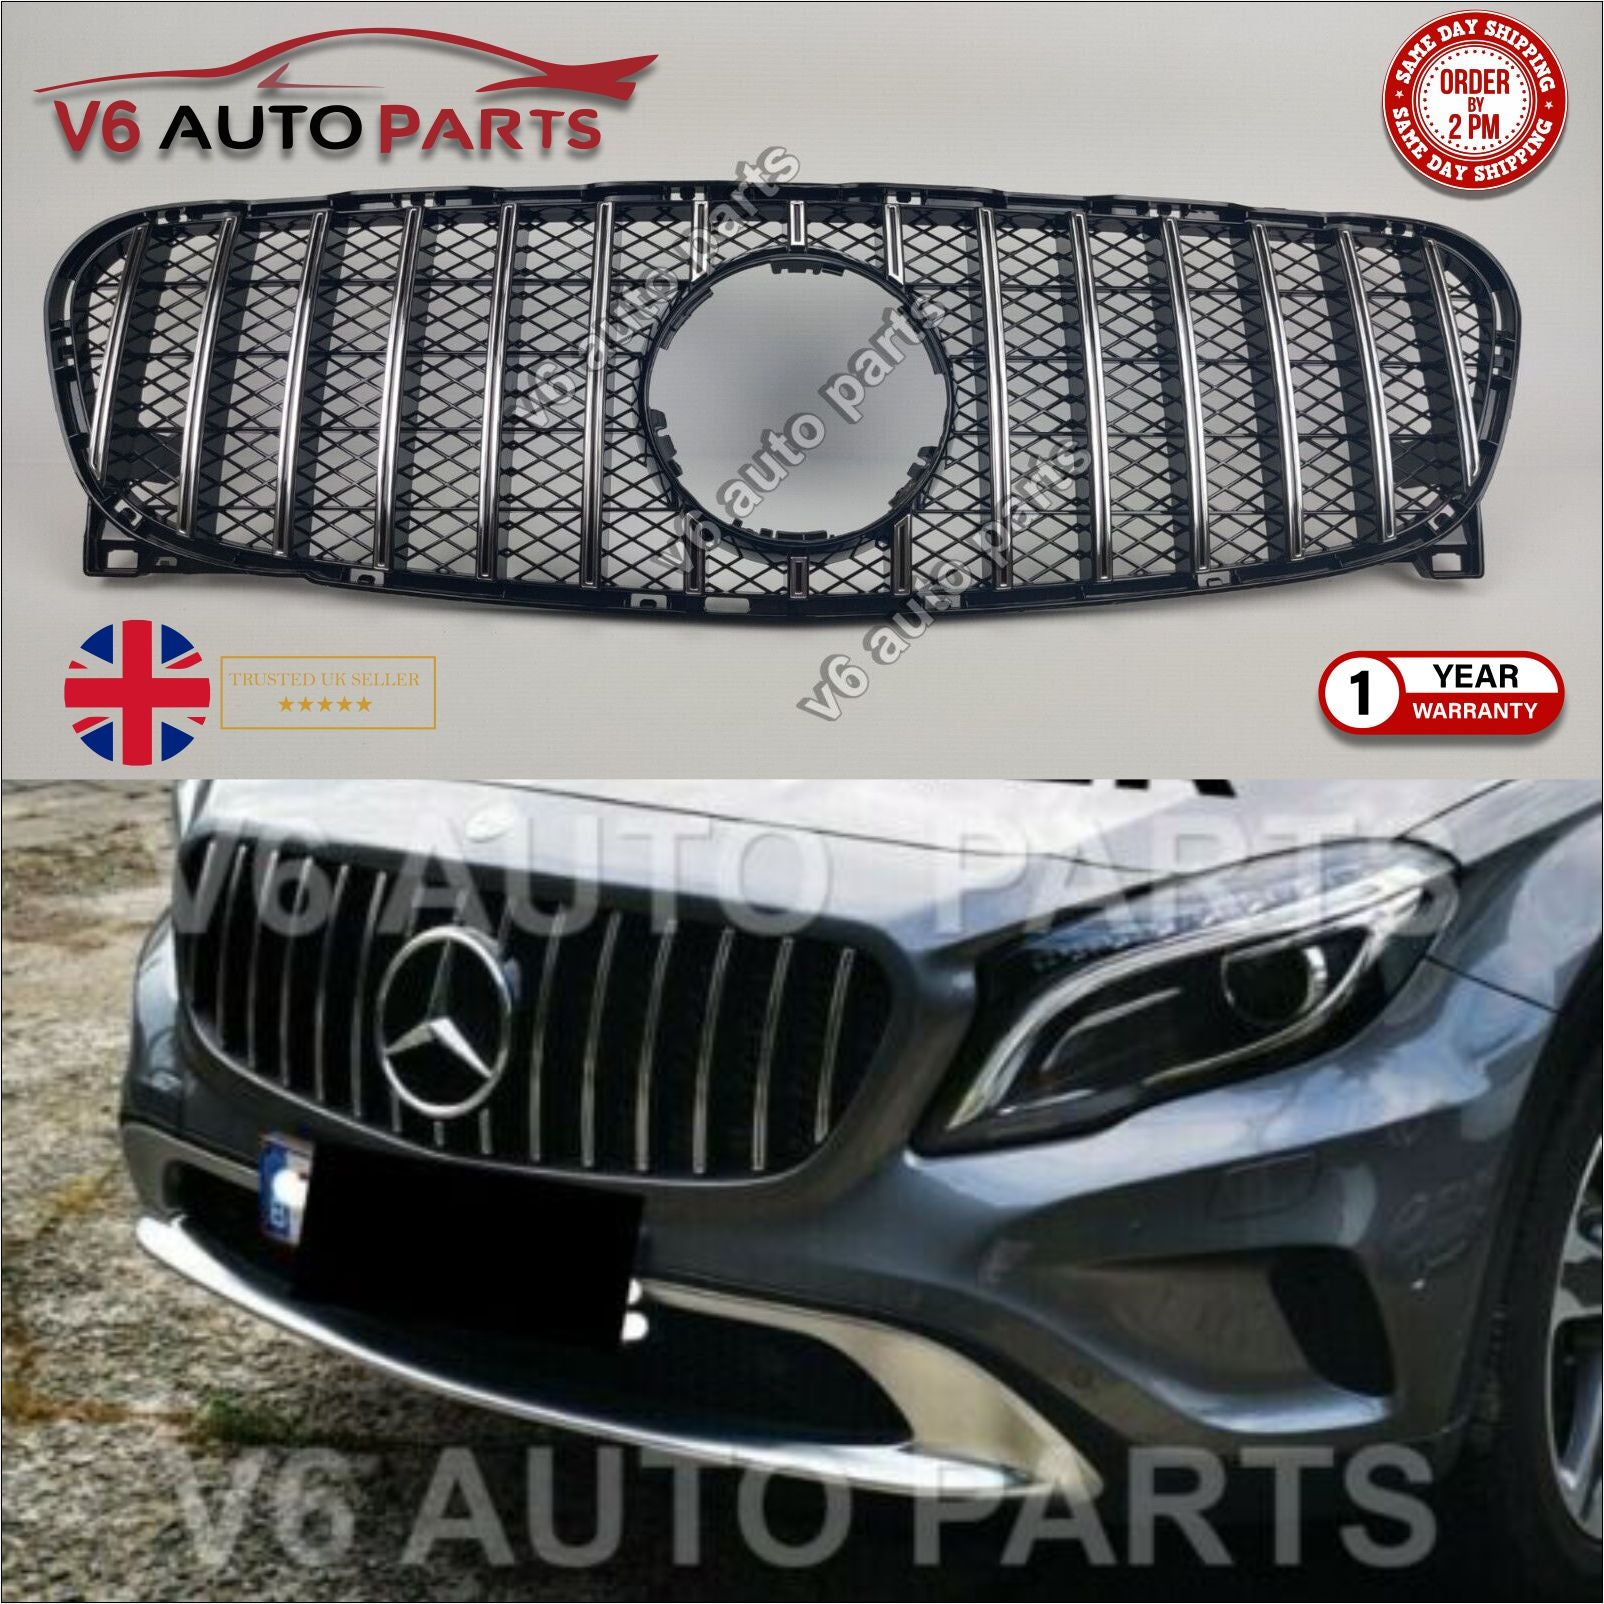 Chrome Grill For Mercedes GLA-Class X156 GLA220 CDI AMG X45 Front Bumper GT Grille 2013-17 Panamericana